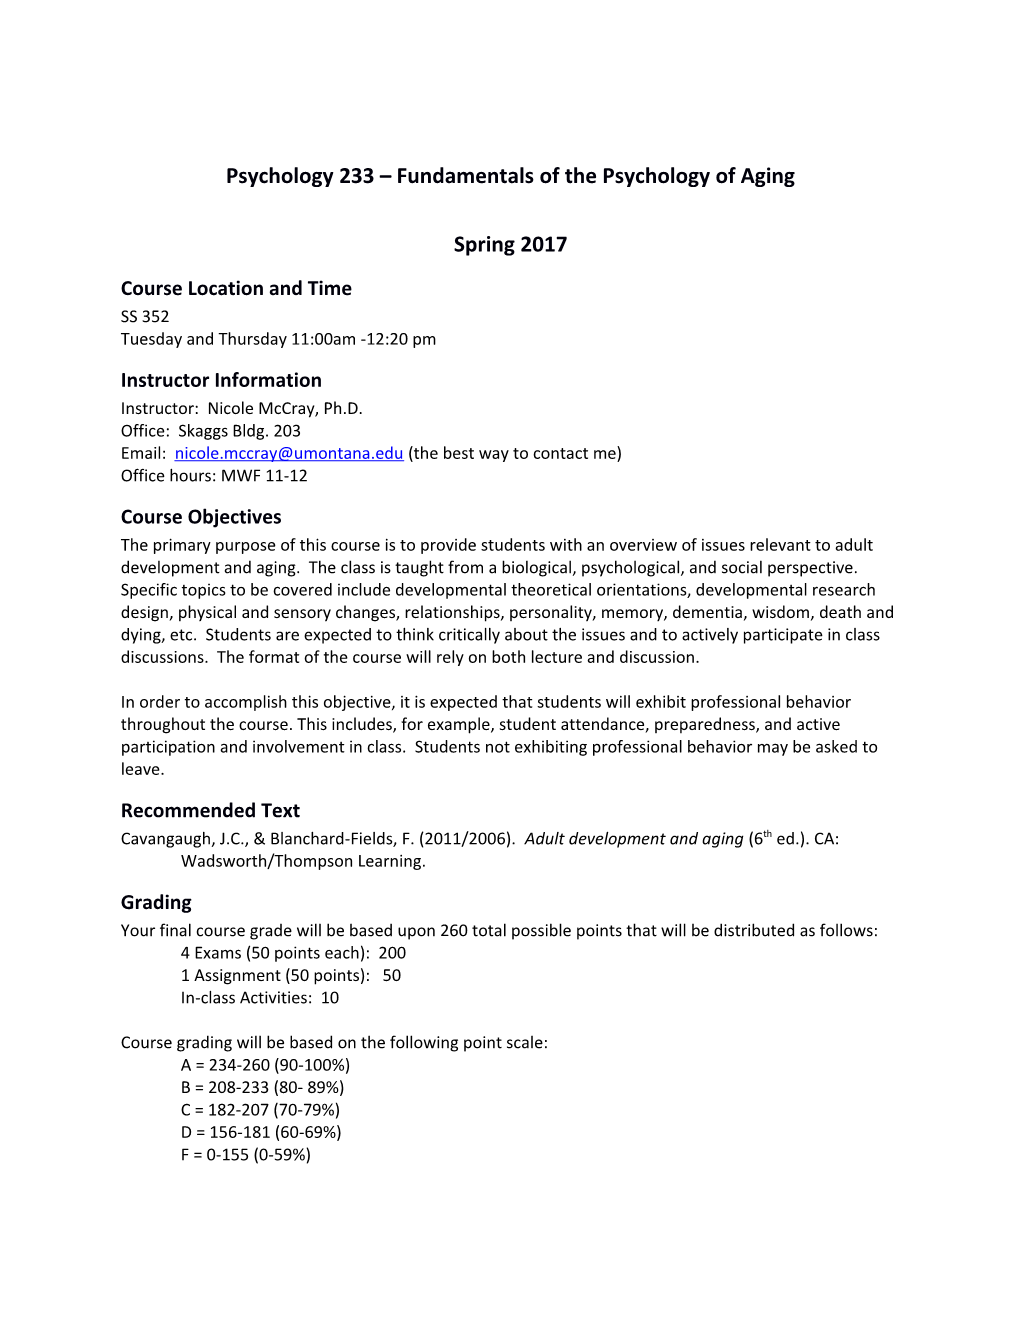 Psychology 233 Fundamentals of the Psychology of Aging